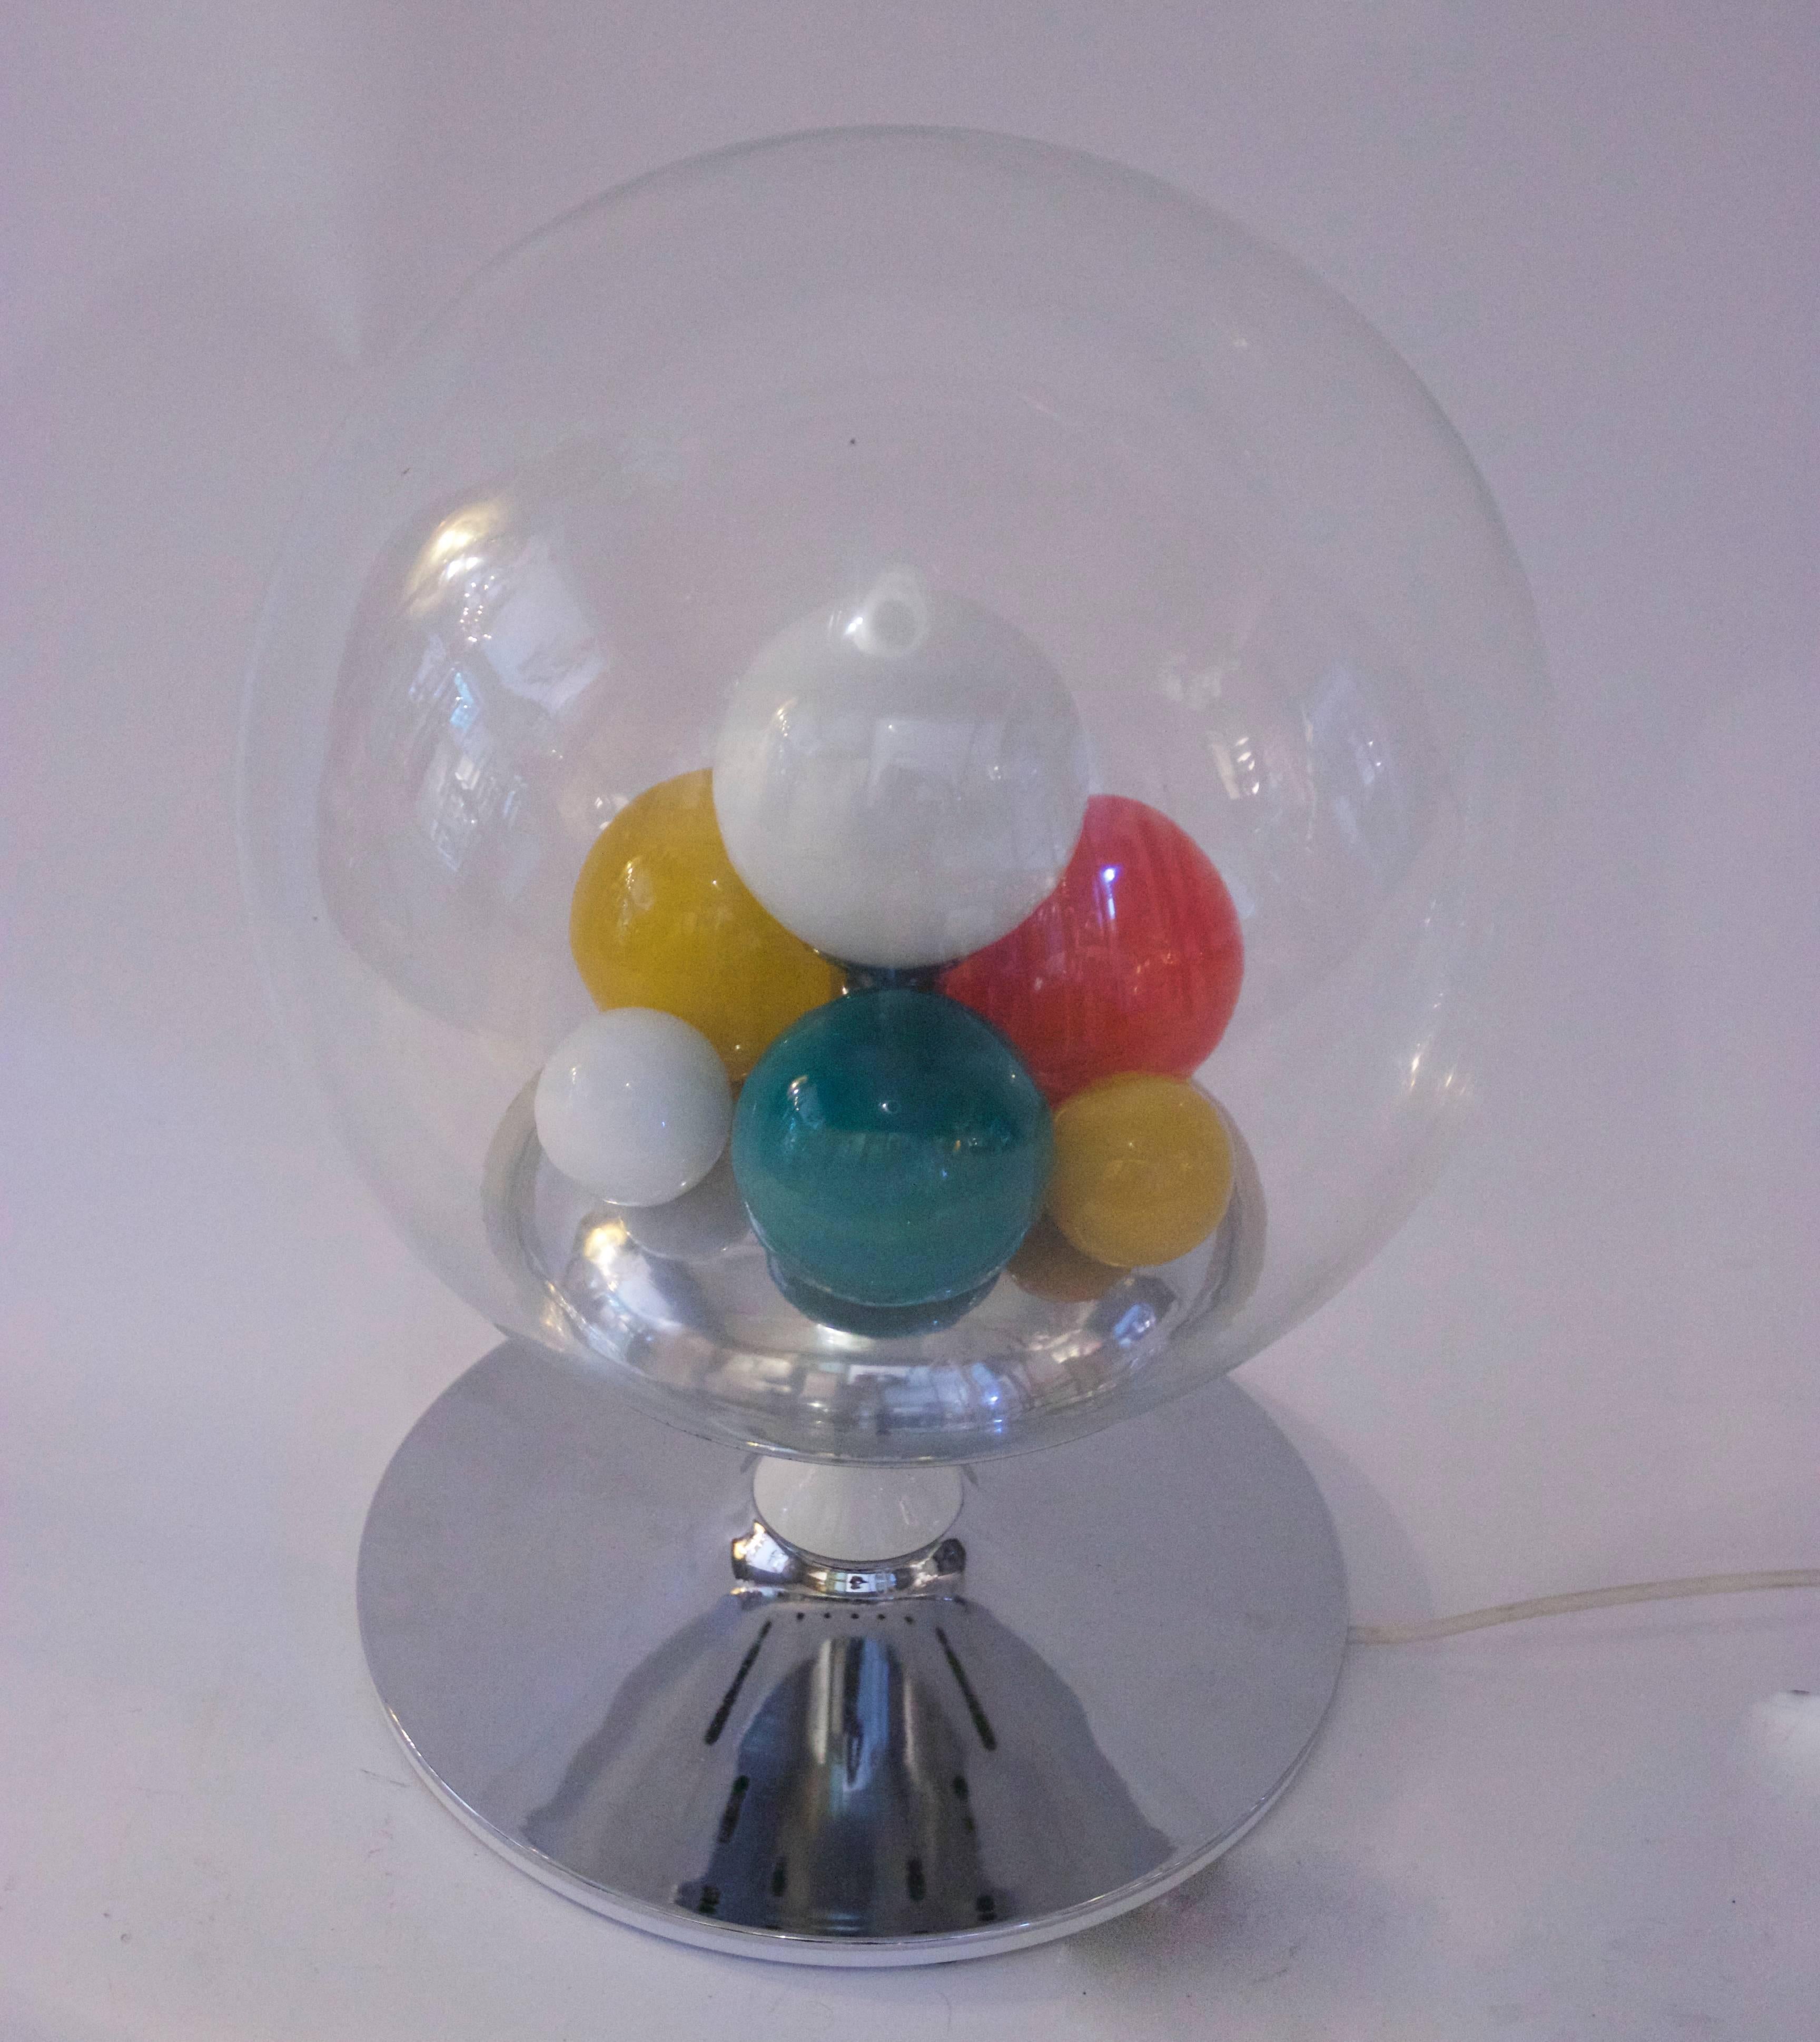 Angelo Brotto, table lamp, 
metal and glass, enamelled and chromed metal, transparent blown and colored glass balls,
Esperia production, 
circa 1965, Italy.
Height: 50 cm, diameter: 30 cm.